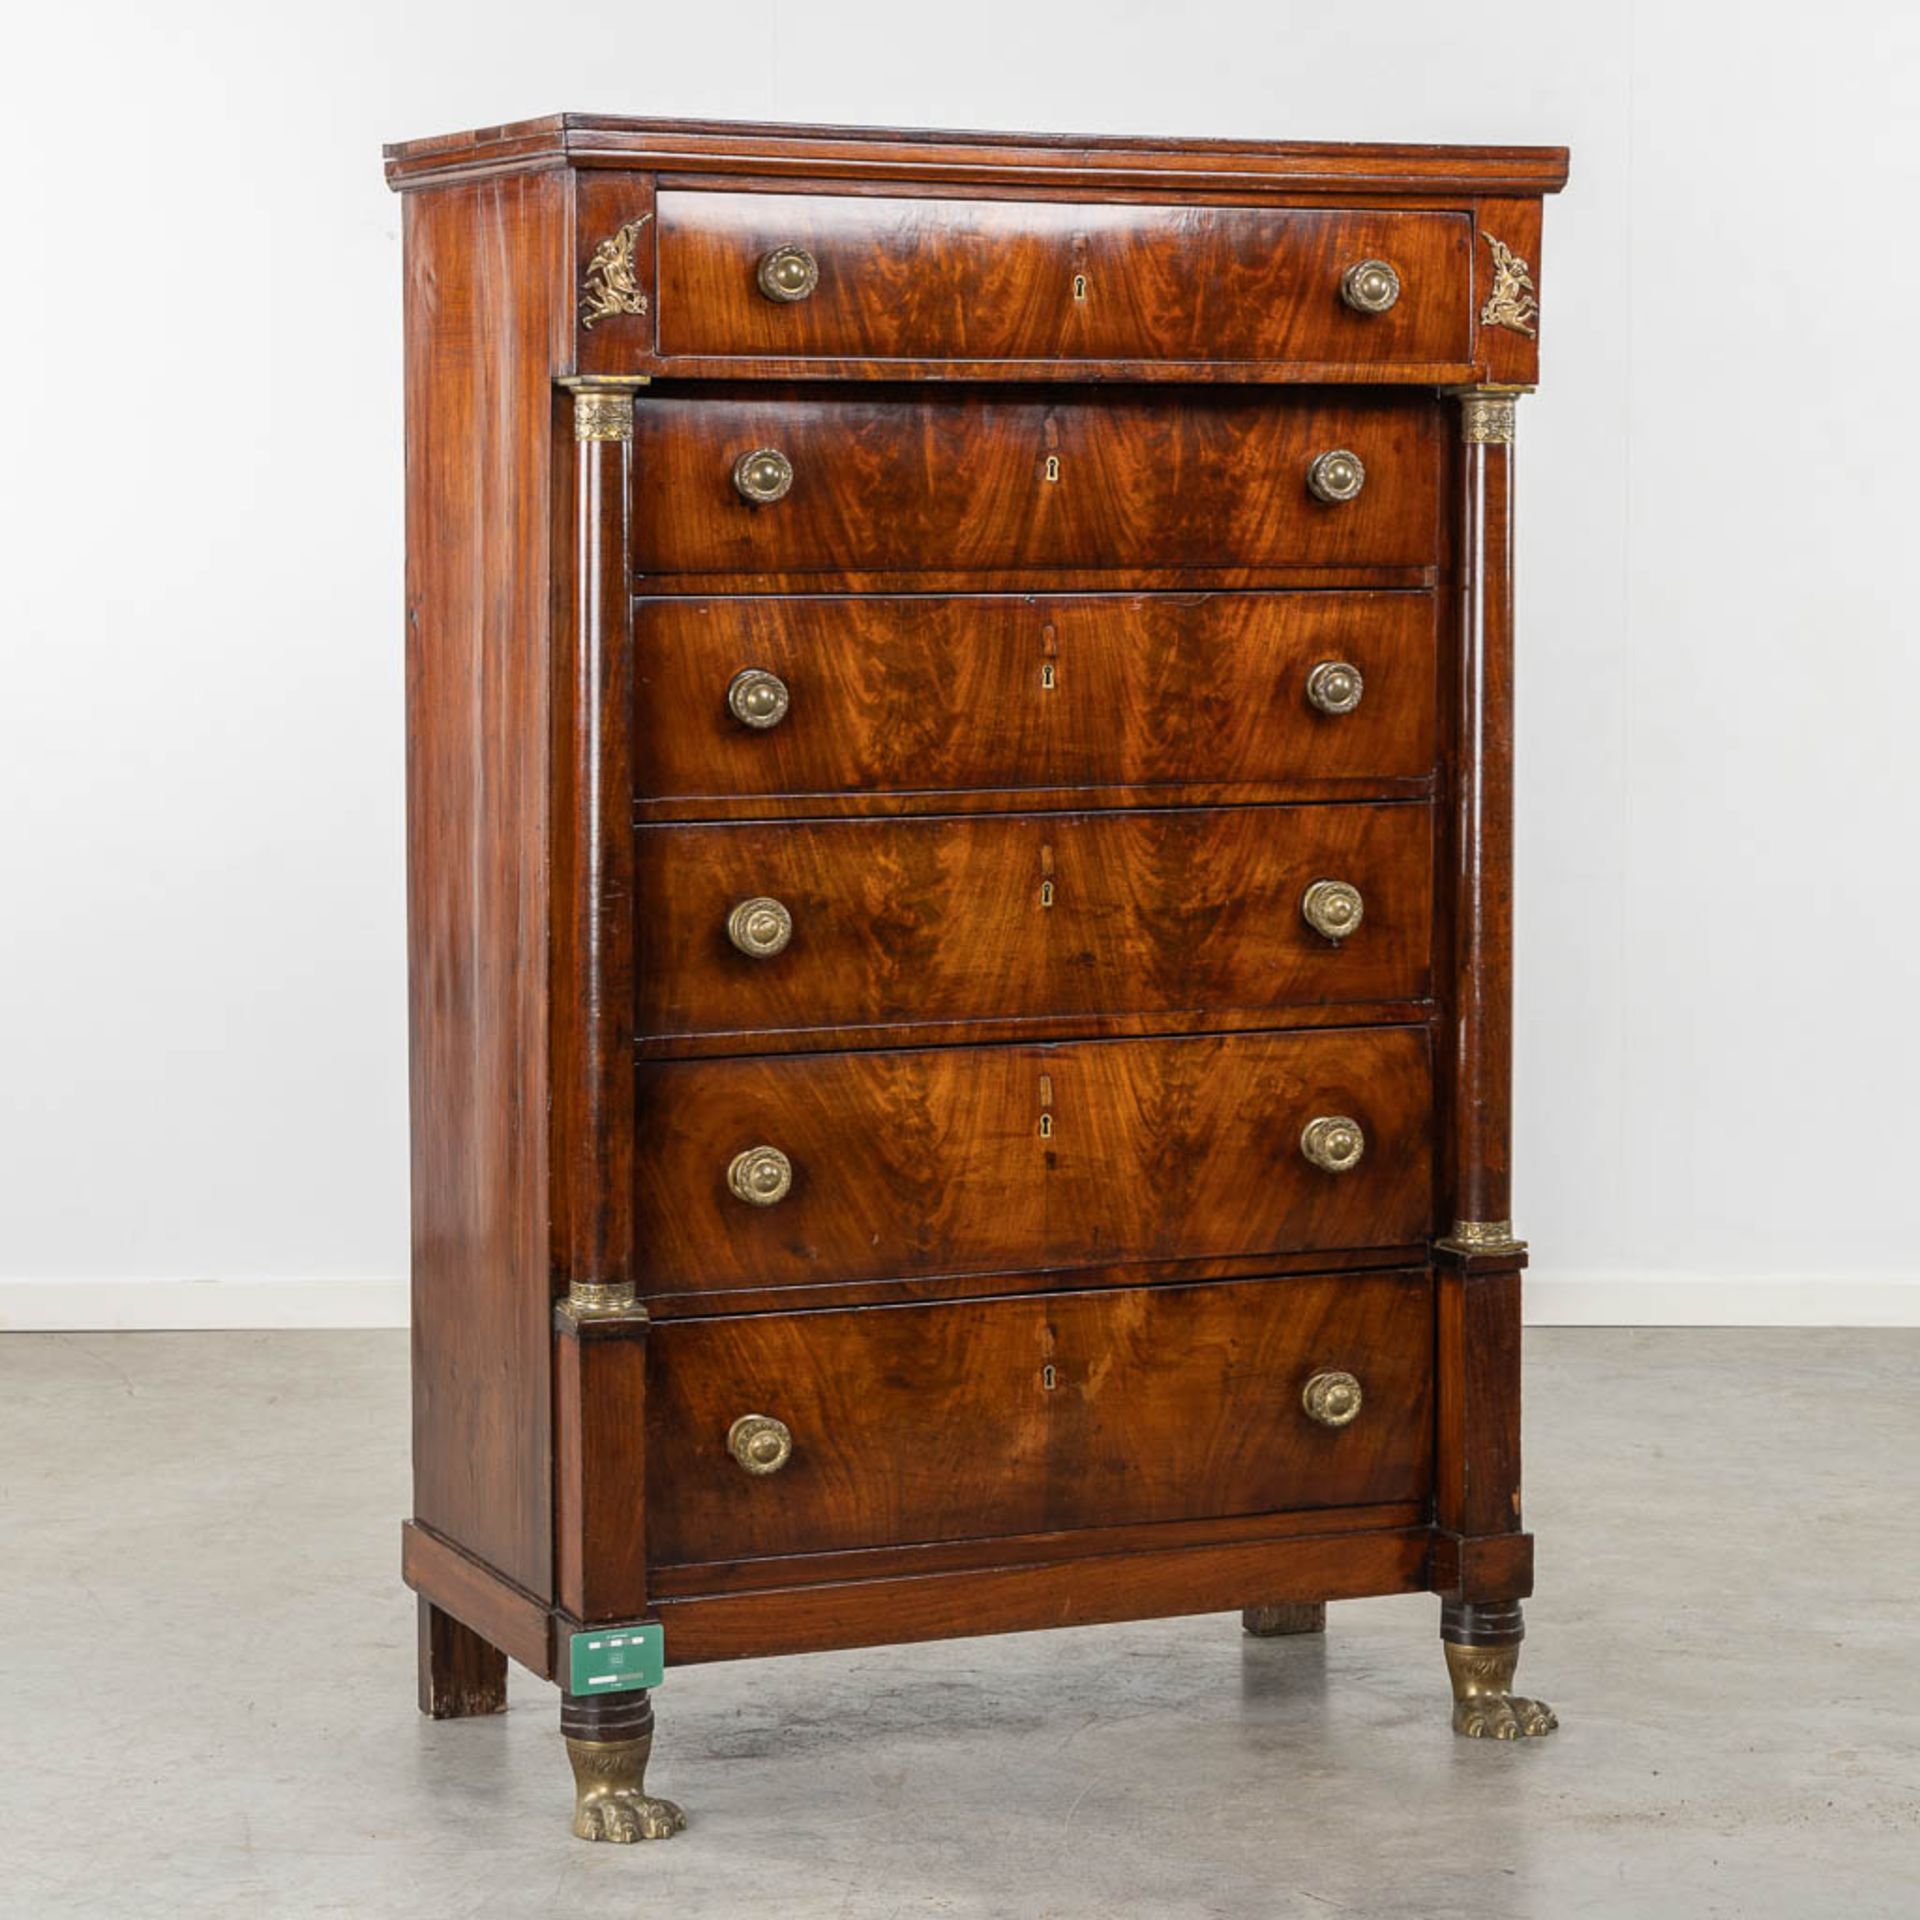 A 6-drawer cabinet, rosewood veneer mounted with bronze. Empire period, 19th C. (L:50 x W:100 x H:15 - Image 2 of 15